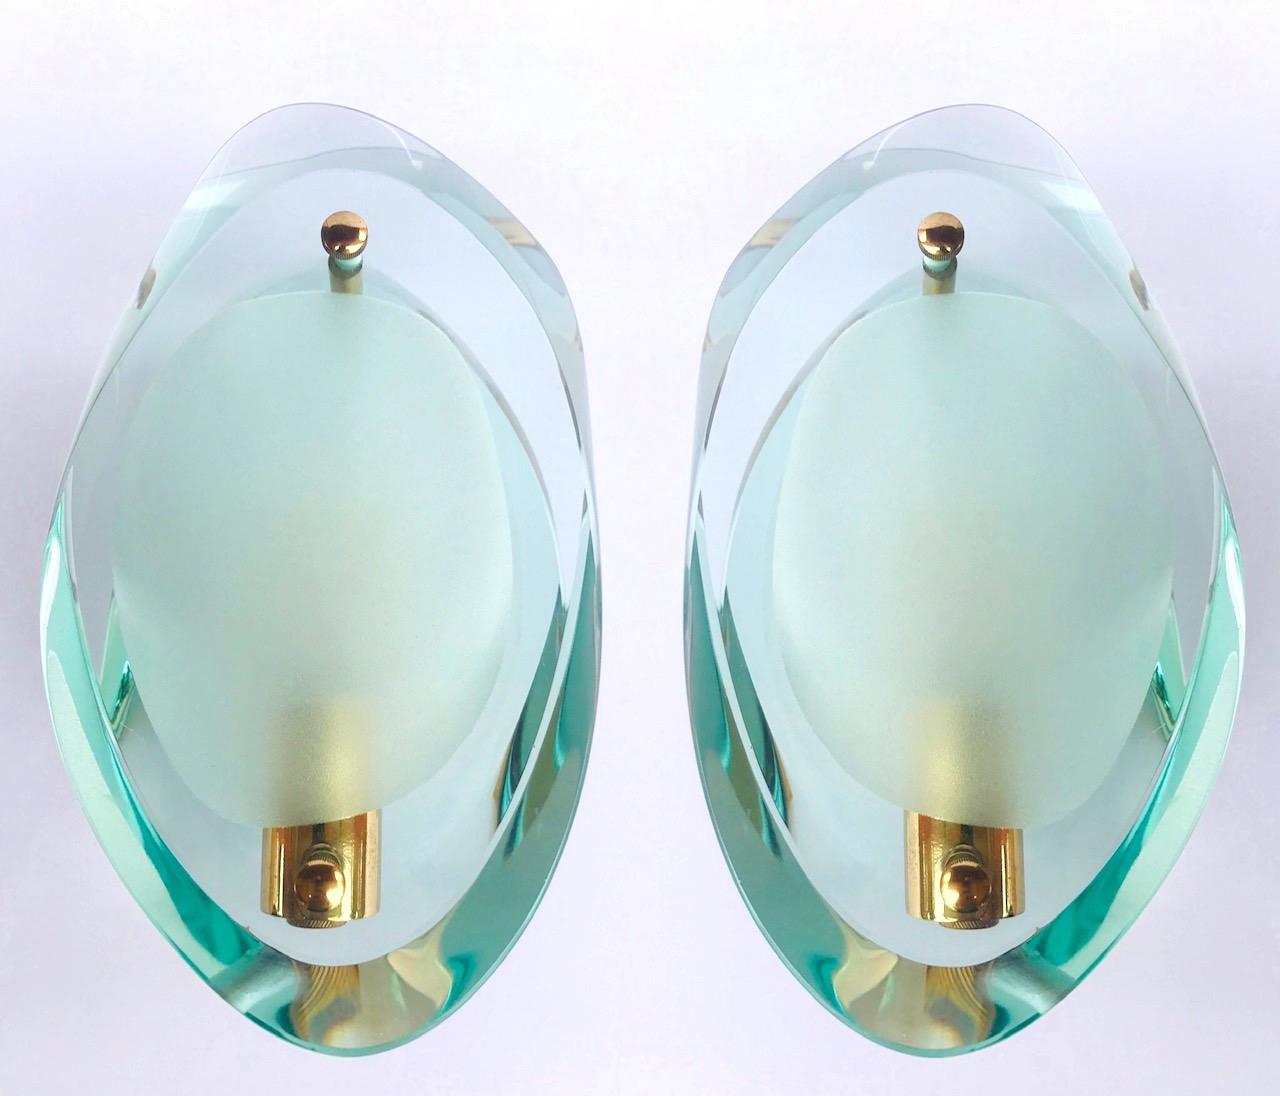 Pair of Italian Mid-Century Modern Murano glass sconces. These stunning sconces are fitted with thick beveled glass plates with organic forms and cubist design. The translucent jeweled glass has a green colored cast featuring sandblasted centers and